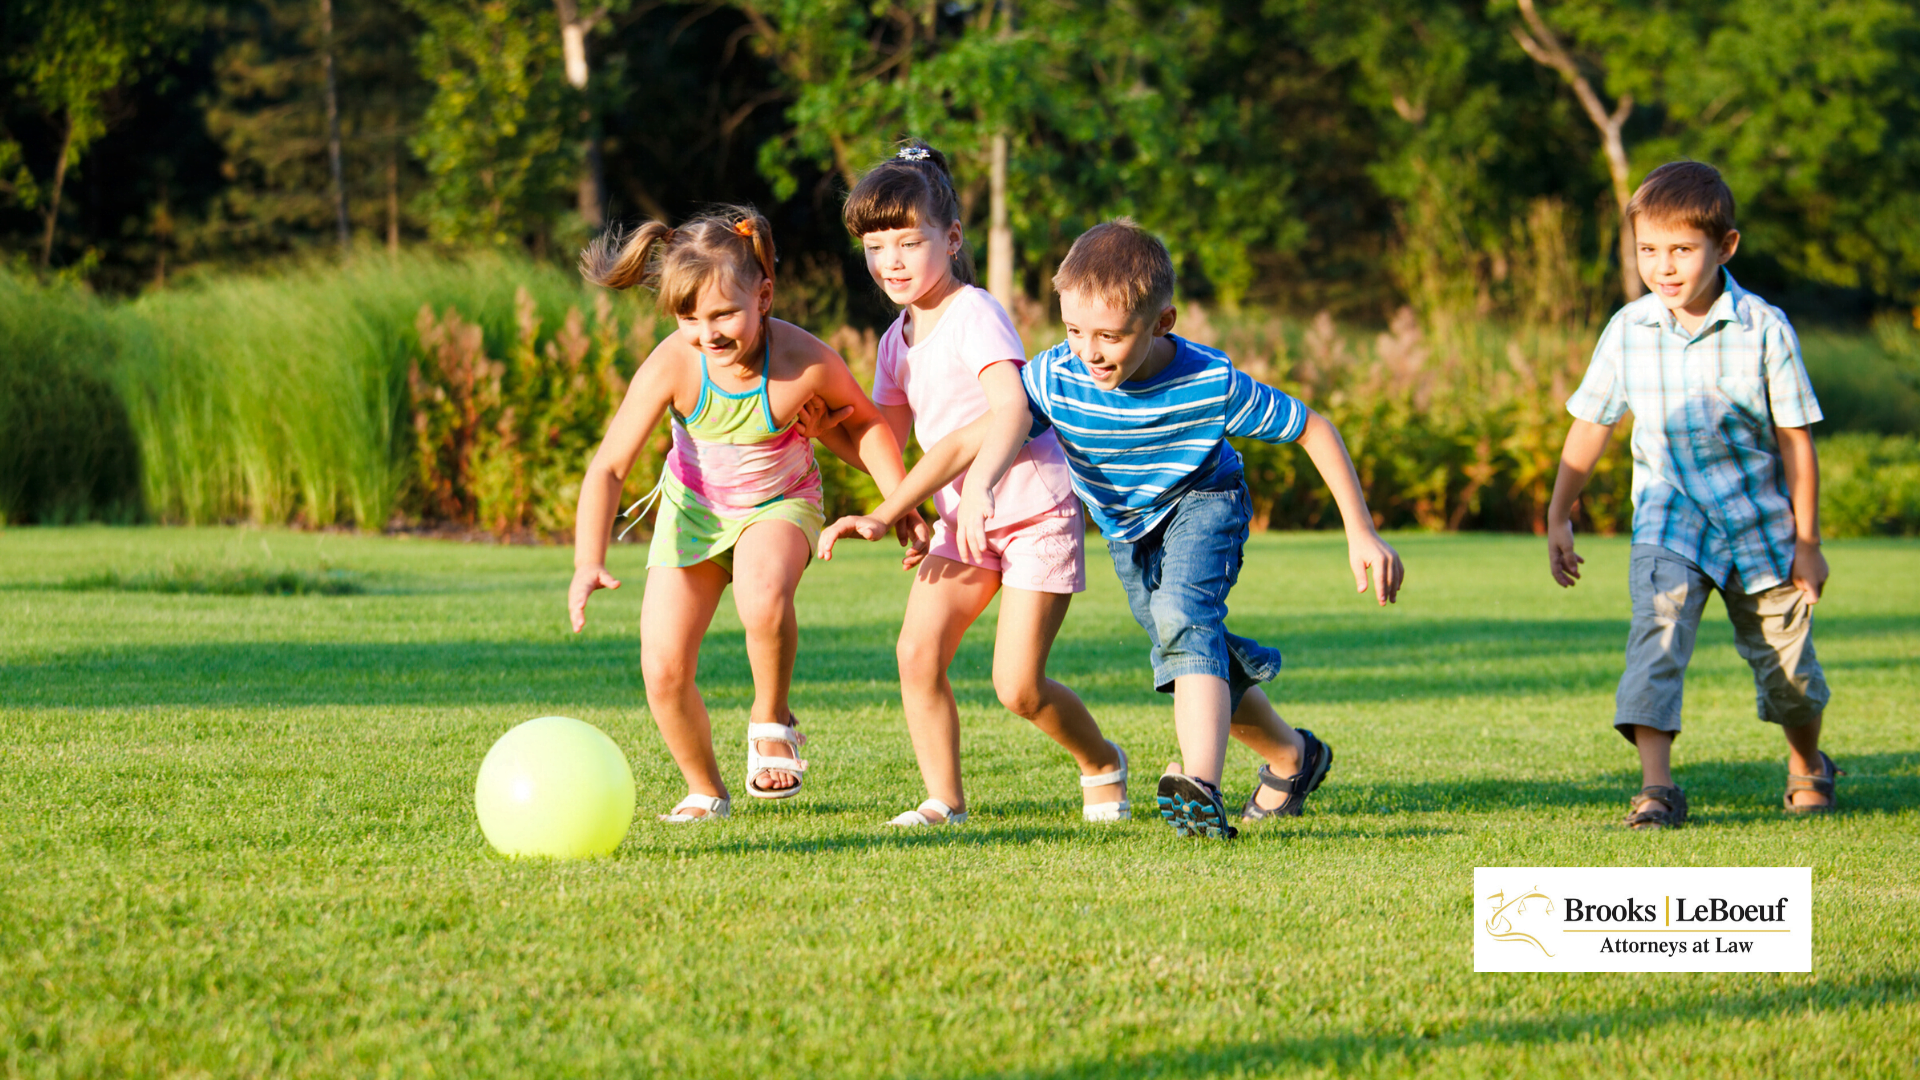 How to Keep Children Safe When They Play Sports